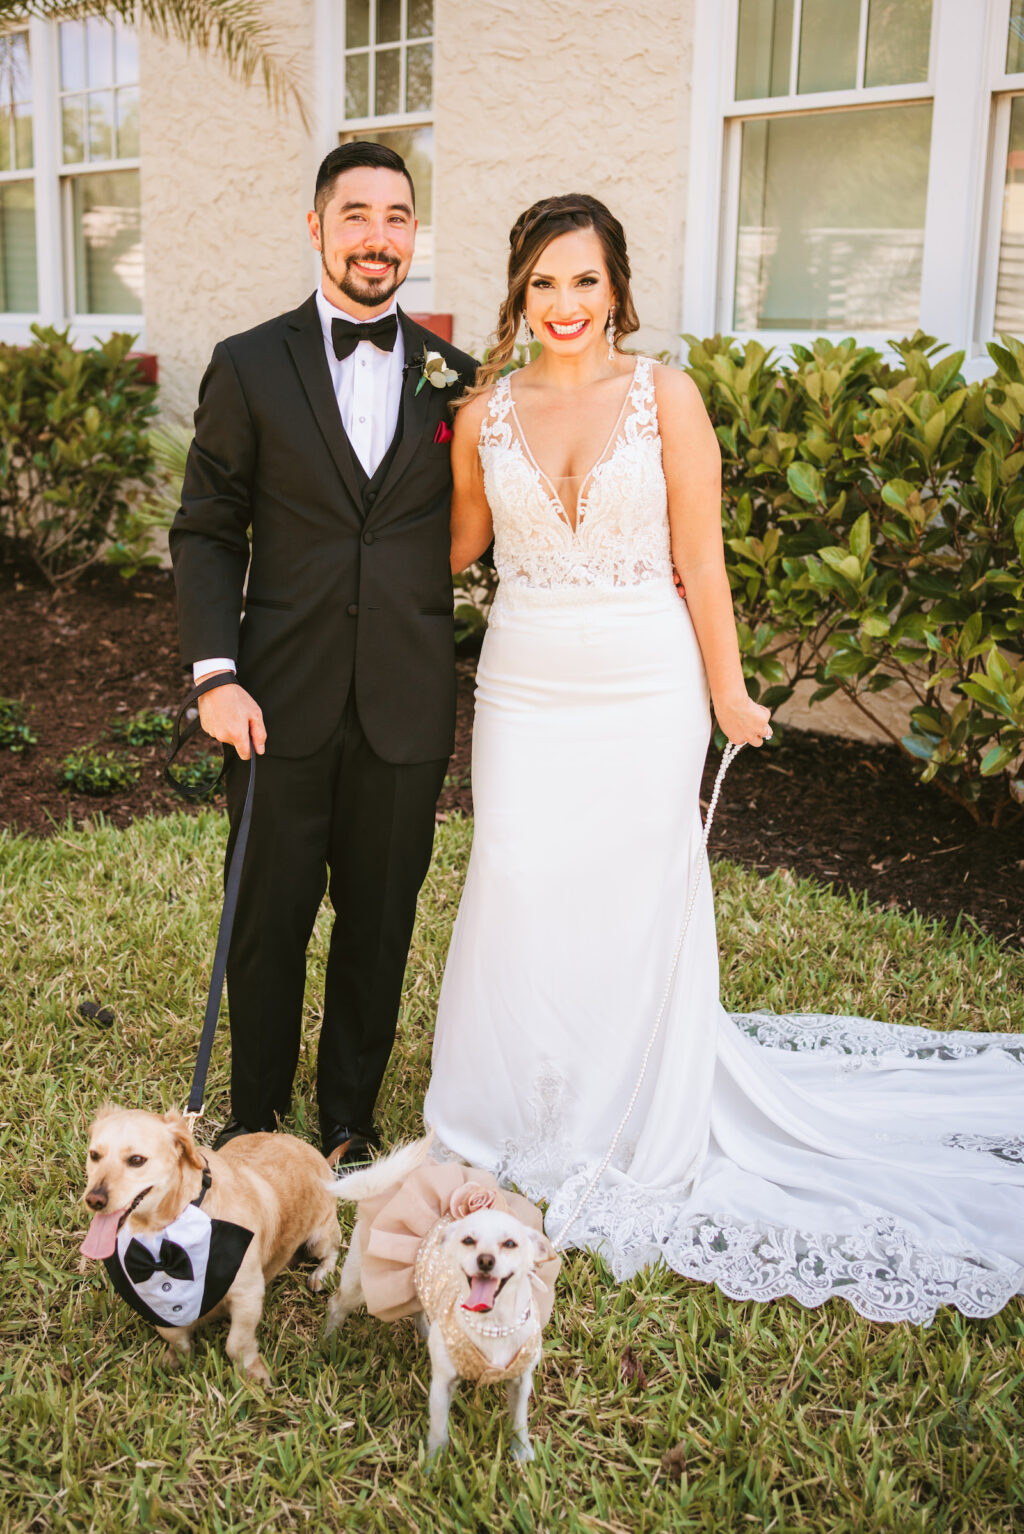 Florida bride wearing floral lace and illusion plunging v neckline fitted wedding dress, groom wearing black tuxedo with dogs dressed up | Tampa wedding photographer Bonnie Newman Creative | Wedding hair and makeup Femme Akoi Beauty Studio